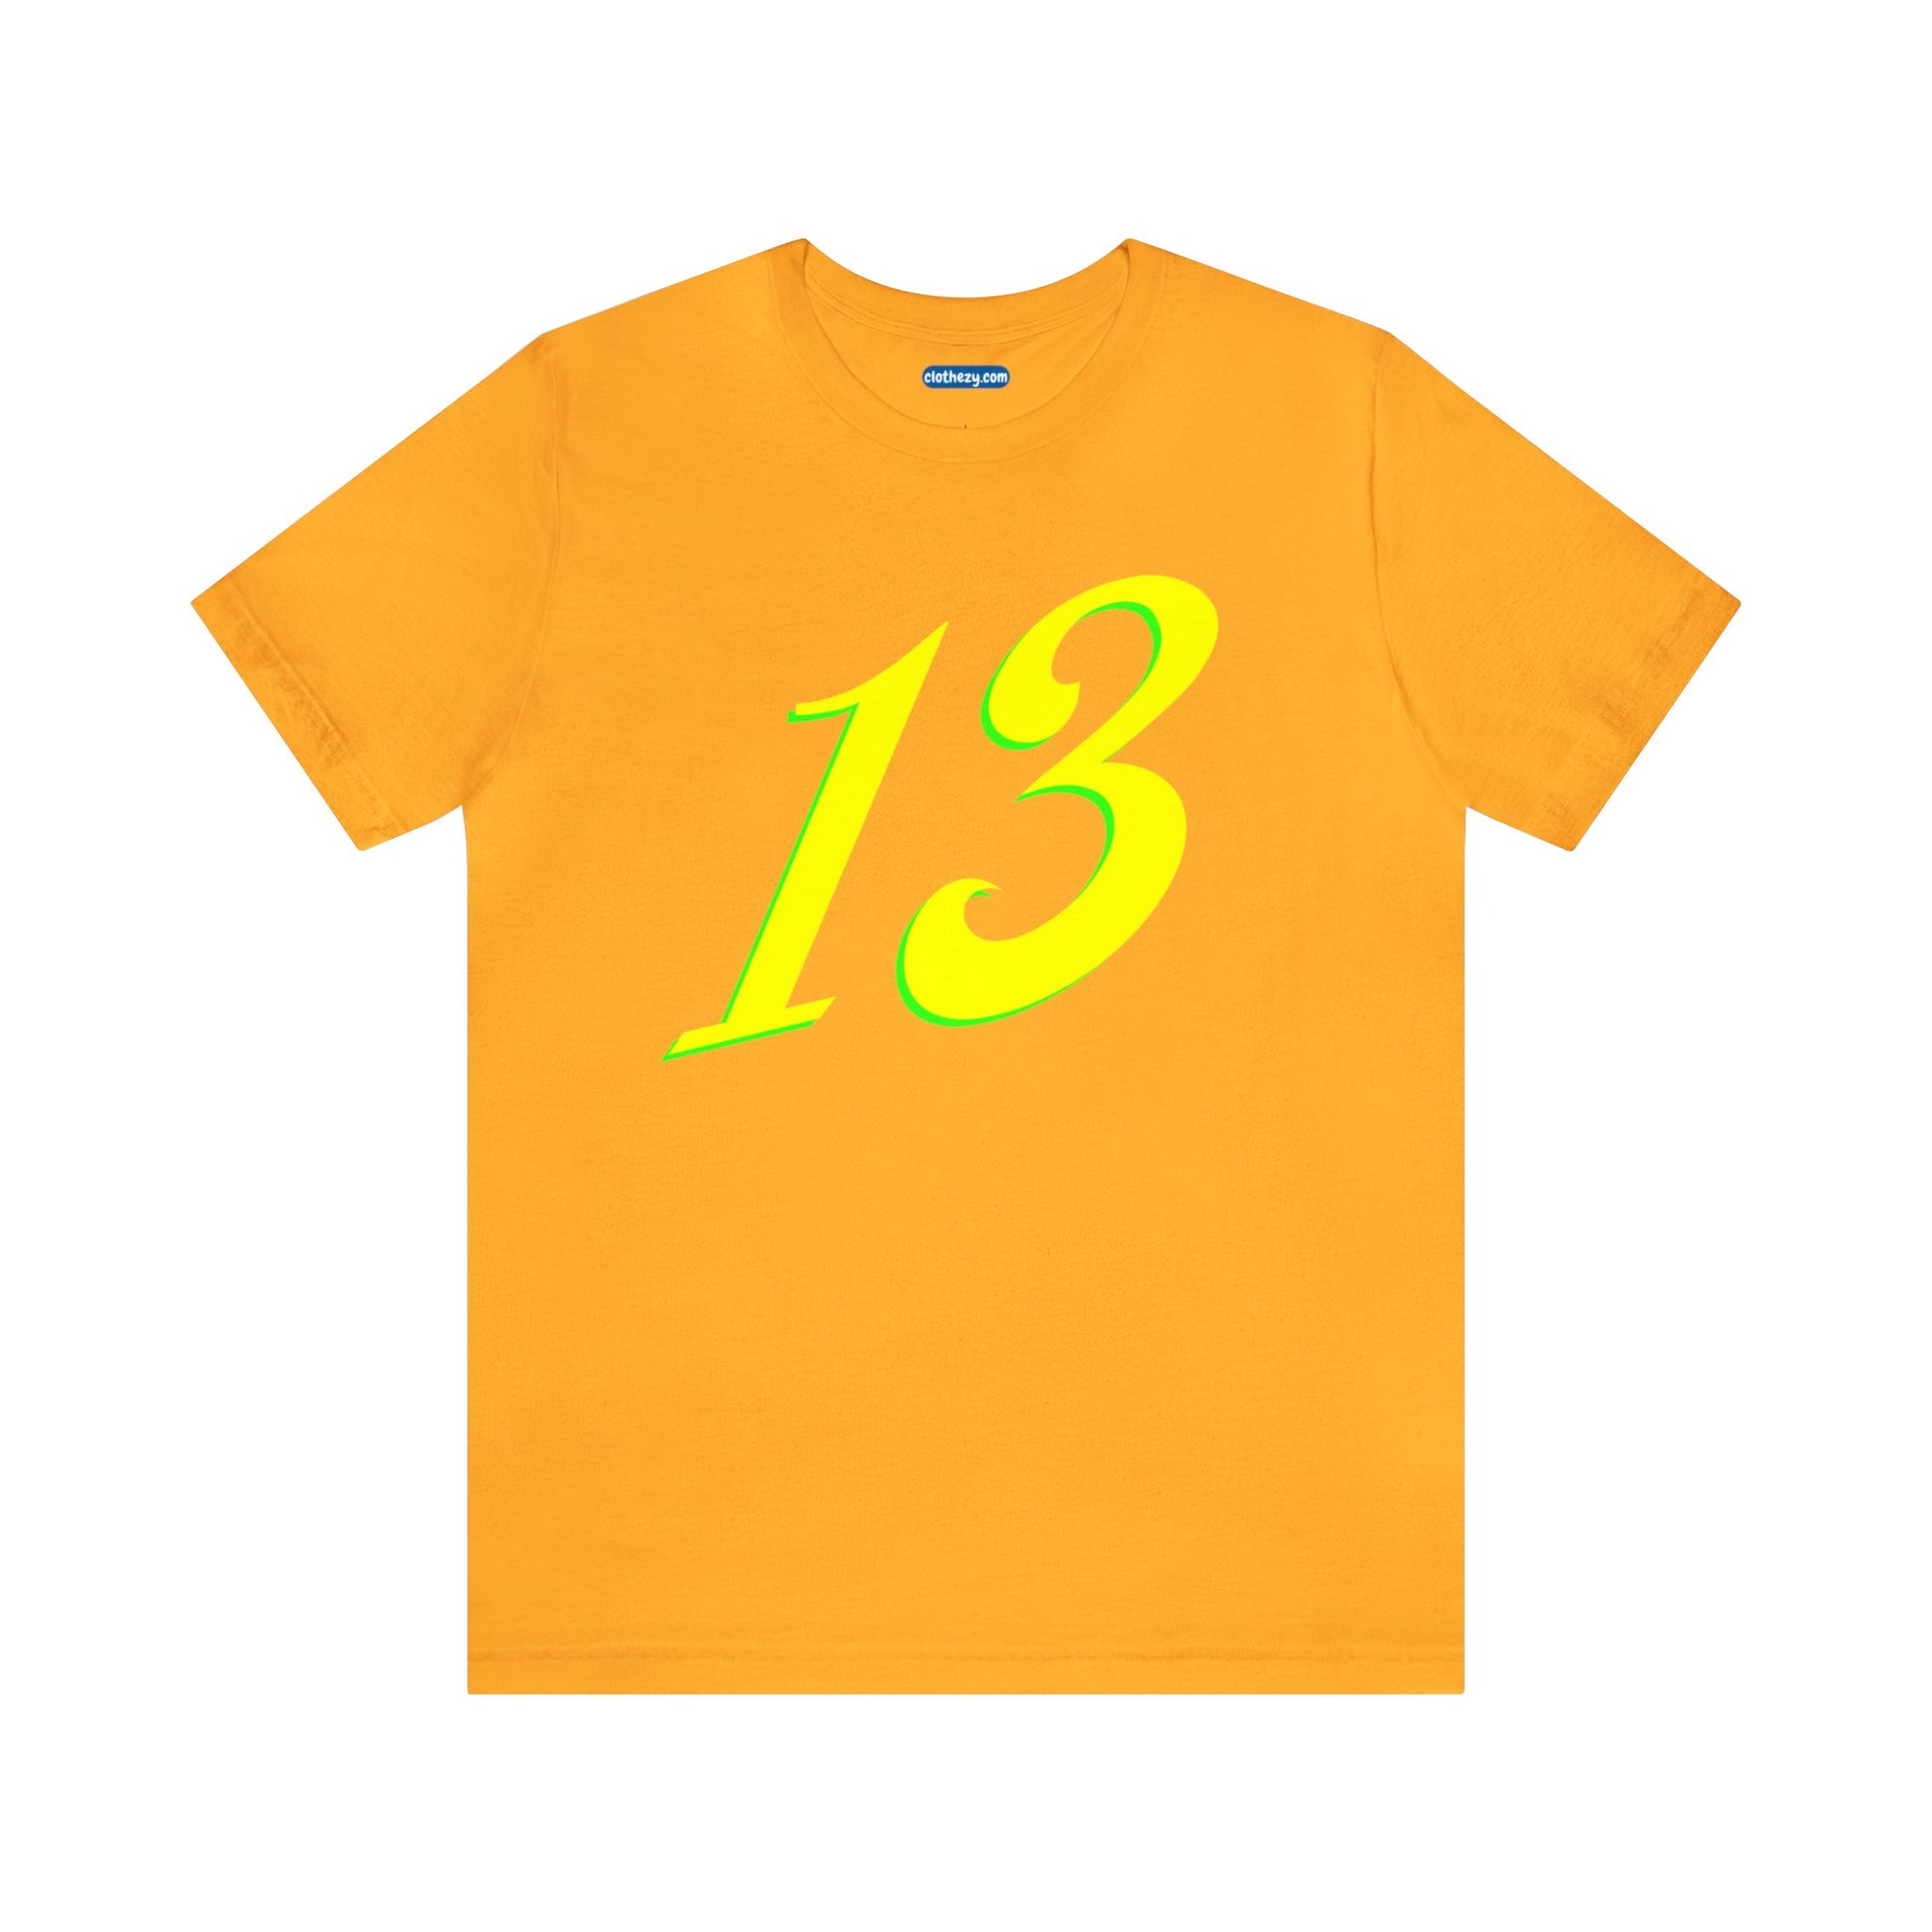 Number 13 Design - Soft Cotton Tee for birthdays and celebrations, Gift for friends and family, Multiple Options by clothezy.com in Green Heather Size Small - Buy Now